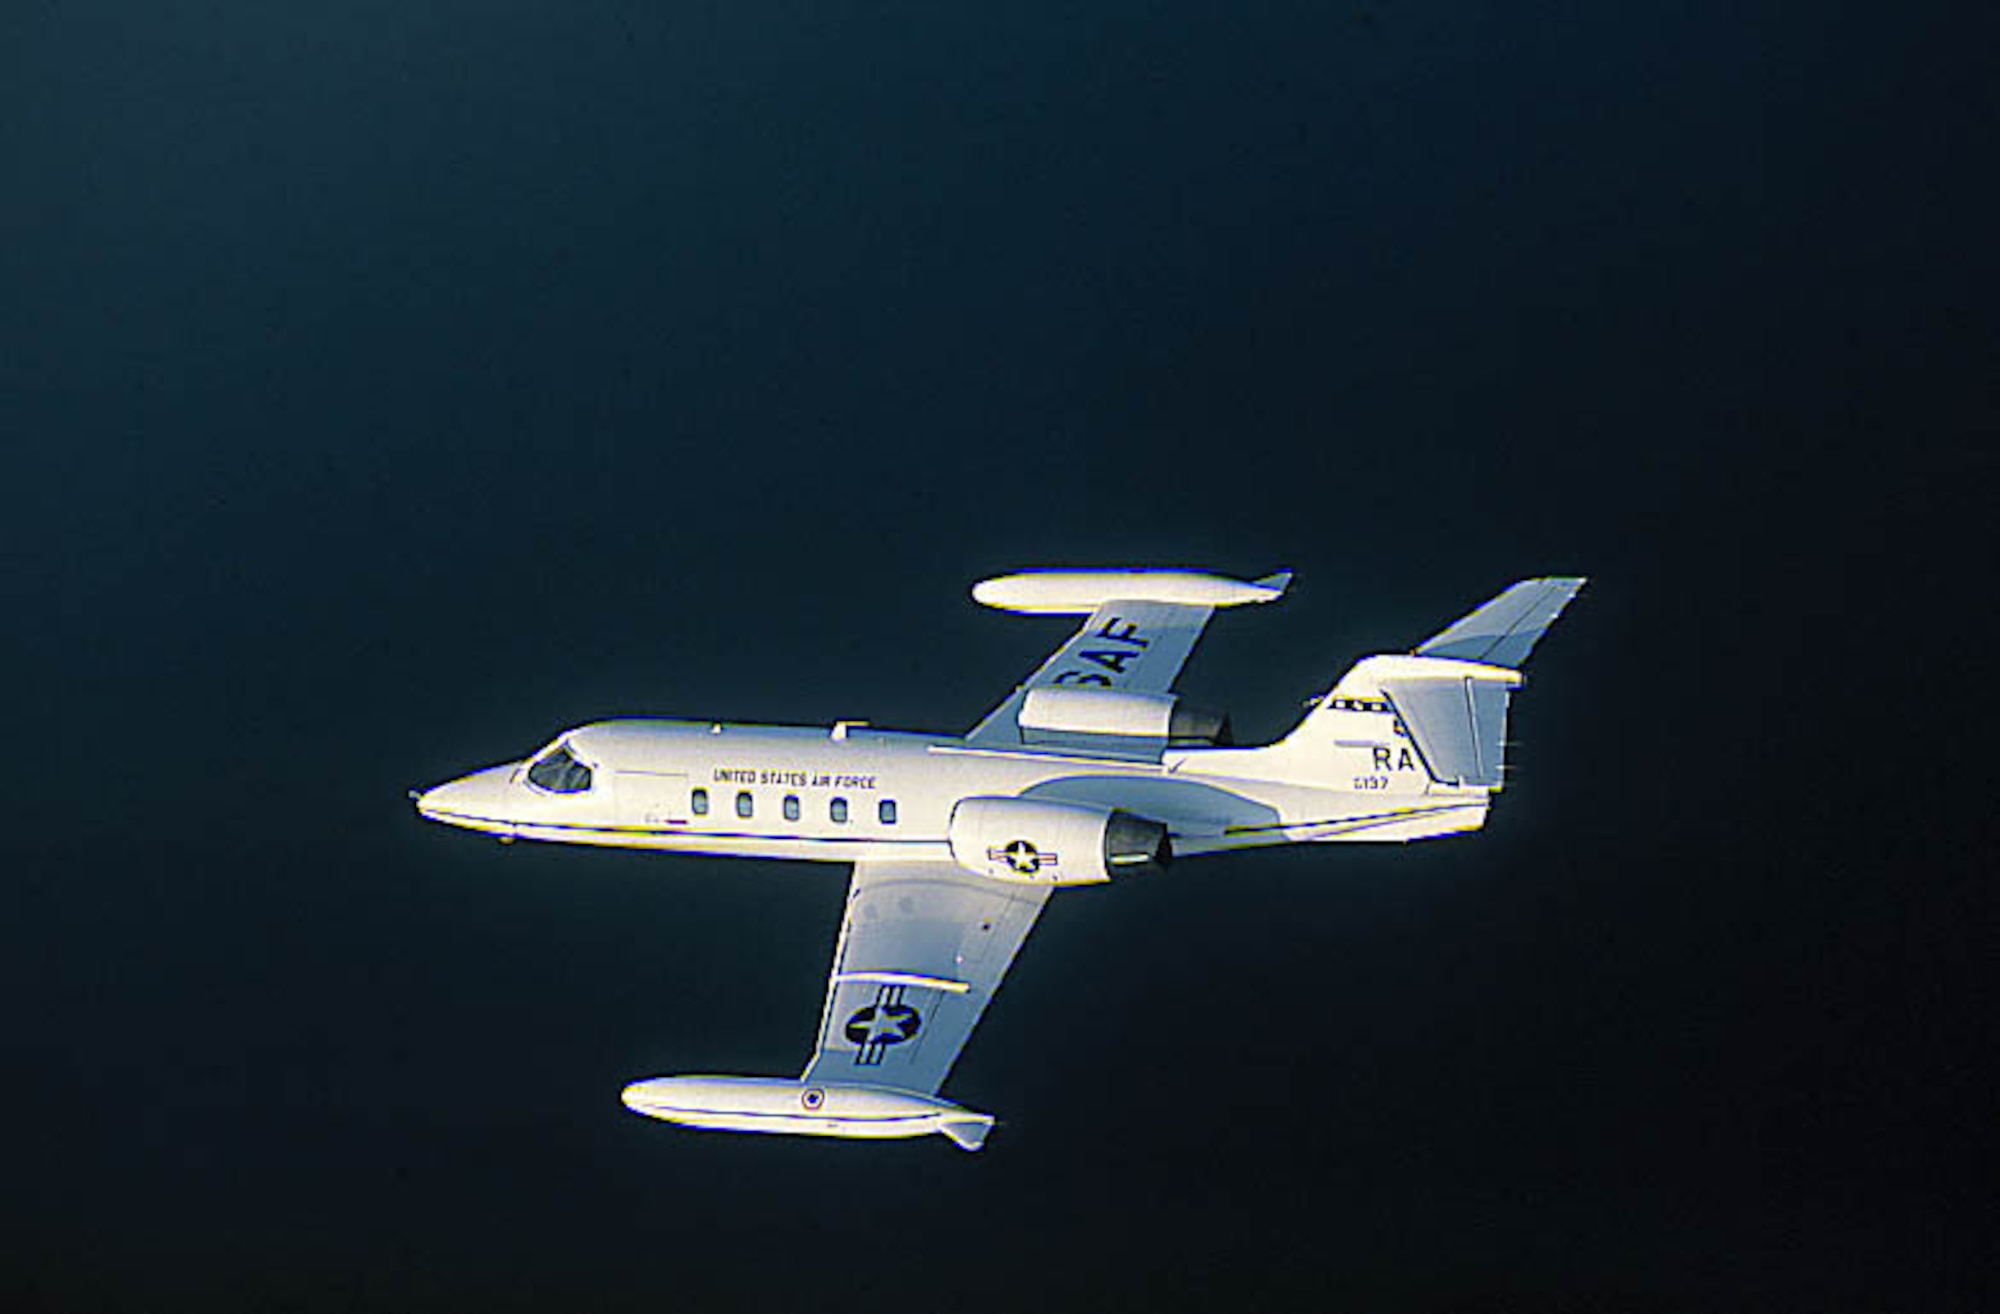 FILE PHOTO -- The C-21A provides cargo and passenger airlift and can transport litters during medical evacuations. The C-21A's turbofan engines are pod-mounted on the sides of the rear fuselage. The swept-back wings have hydraulically actuated, single-slotted flaps. The aircraft has a retractable tricycle landing gear, single steerable nose gear and multiple-disc hydraulic brakes. The C-21A can carry eight passengers and 42 cubic feet (1.26 cubic meters) of cargo. The fuel capacity ofthe C-21A is 931 gallons (3,537.8 liters) carried in wingtip tanks. The safety and operational capabilities of the C-21A areincreased by the autopilot, color weather radar and tactical air navigation (TACAN) system, as well as HF, VHF and UHF radios. (U.S. Air Force photo)
